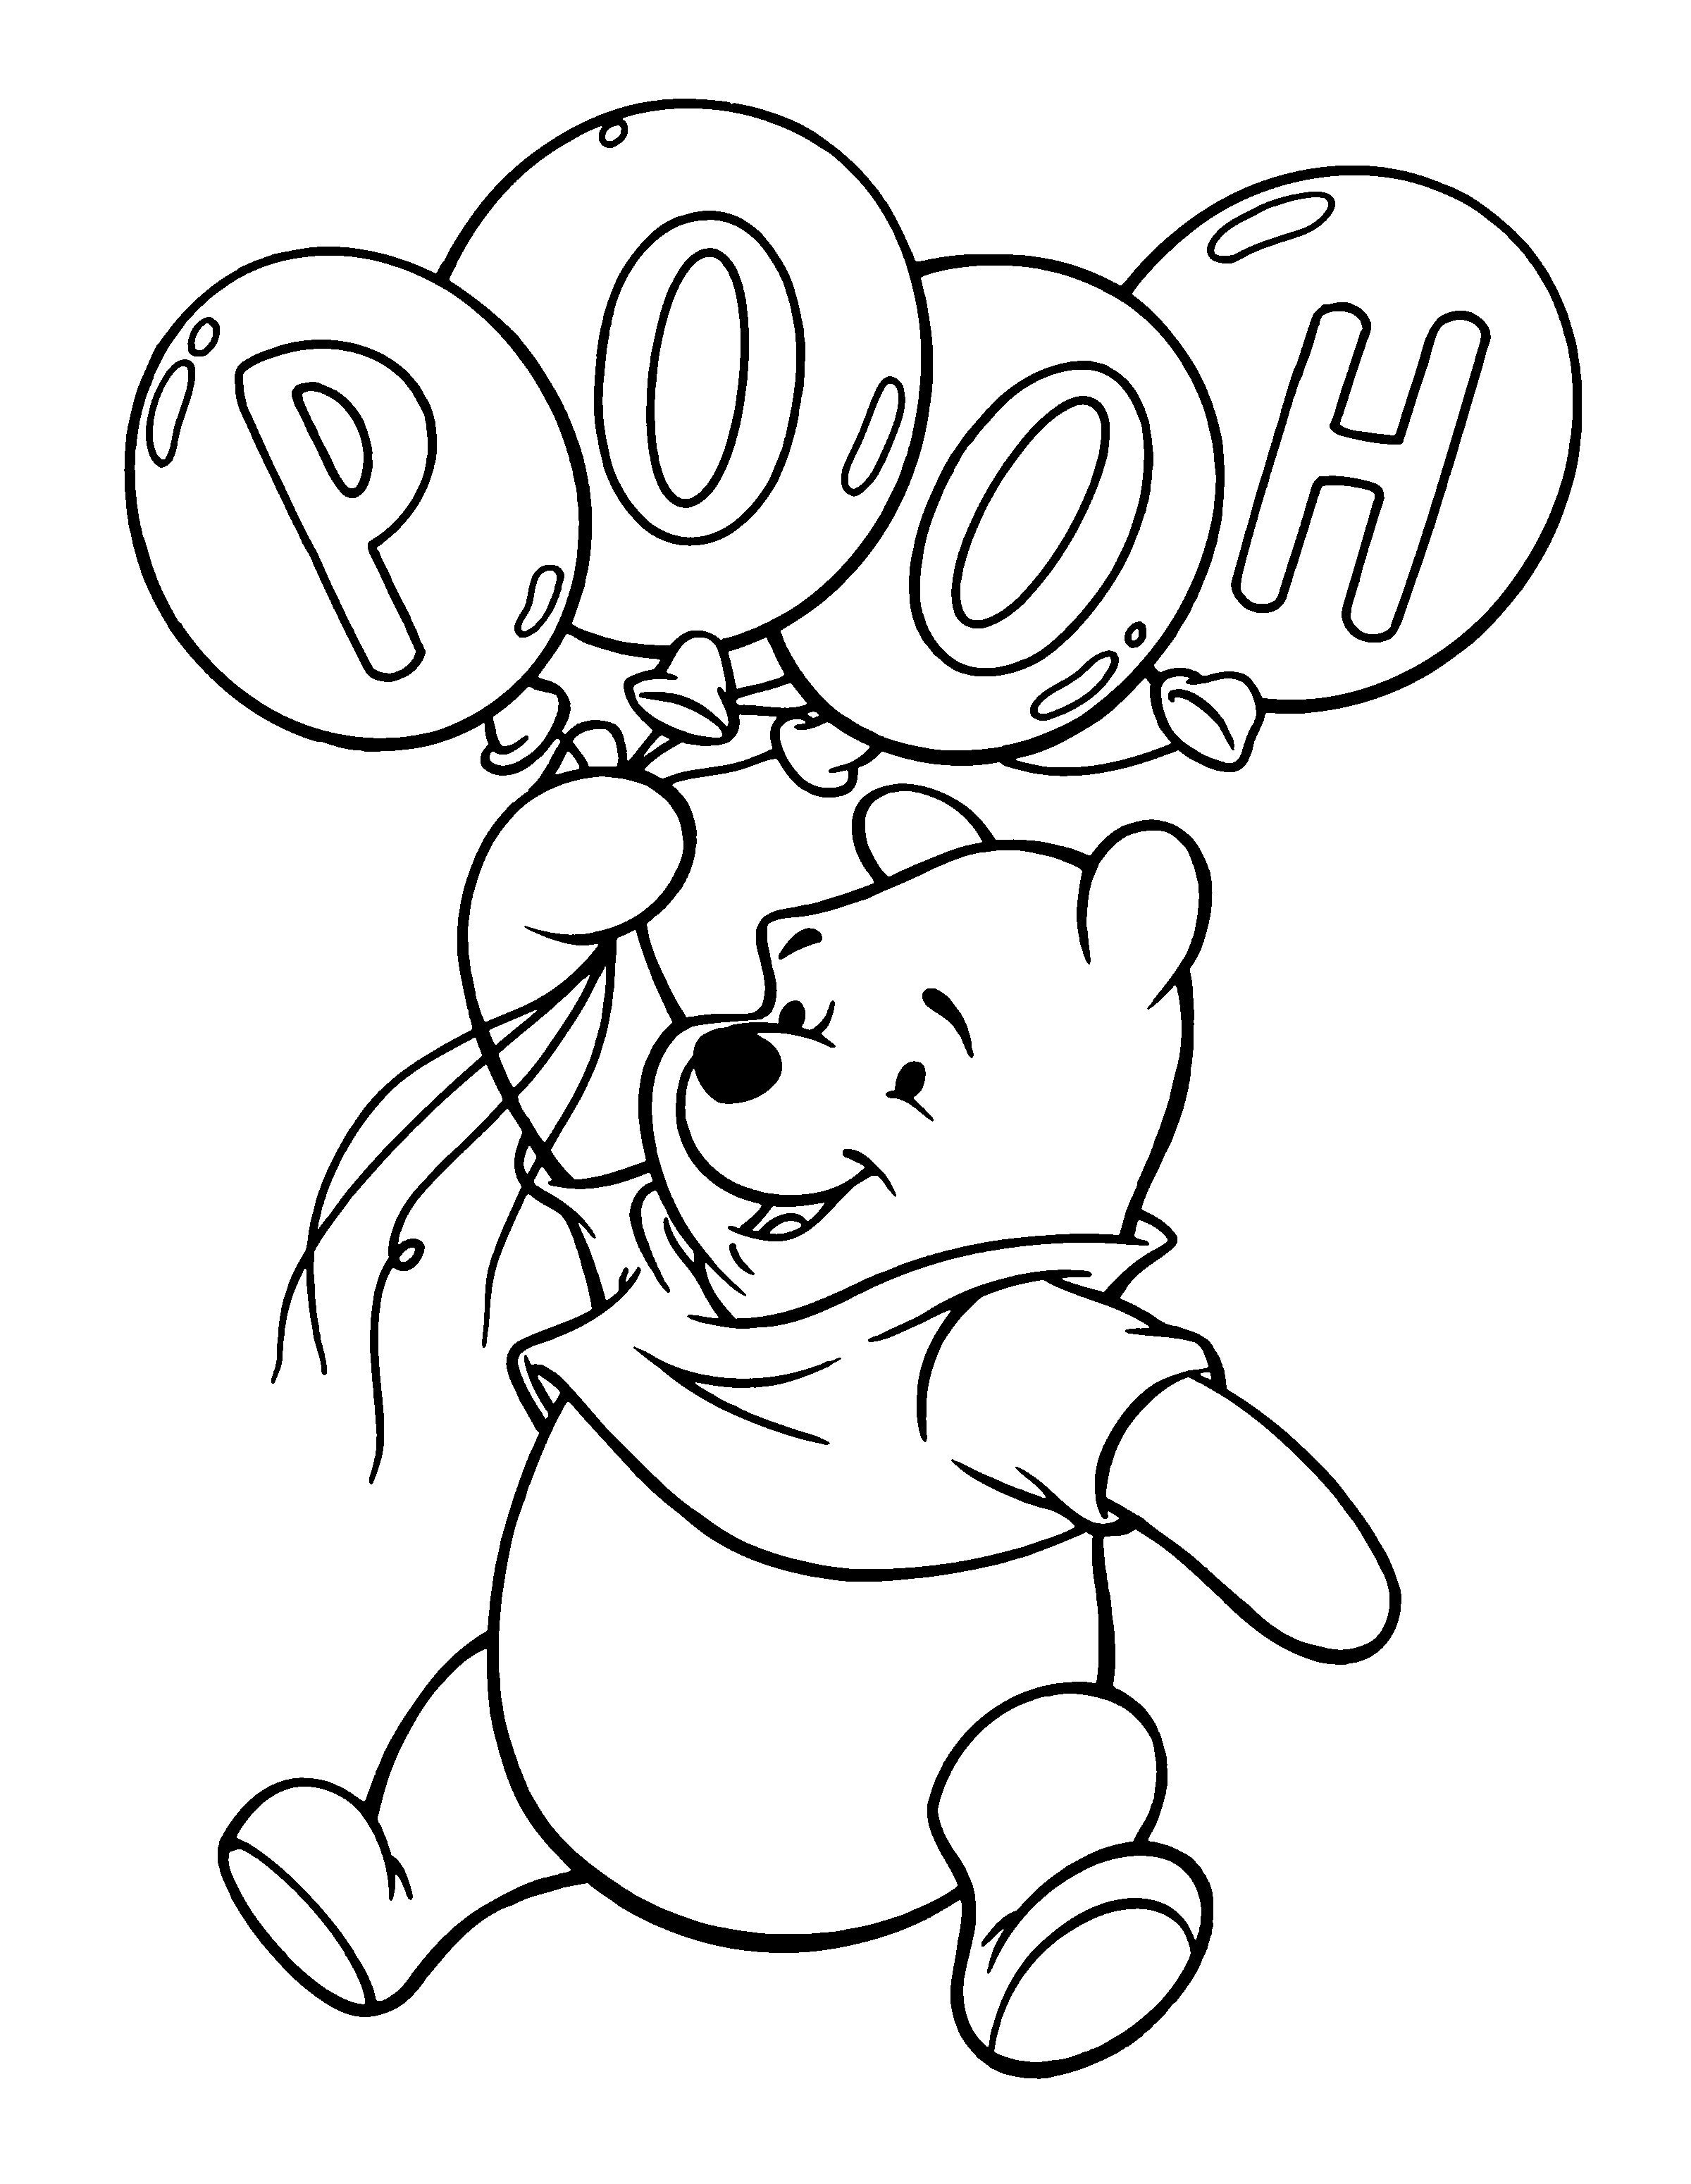 Winnie The Pooh Coloring Pages (11) Coloring Kids - Coloring Kids